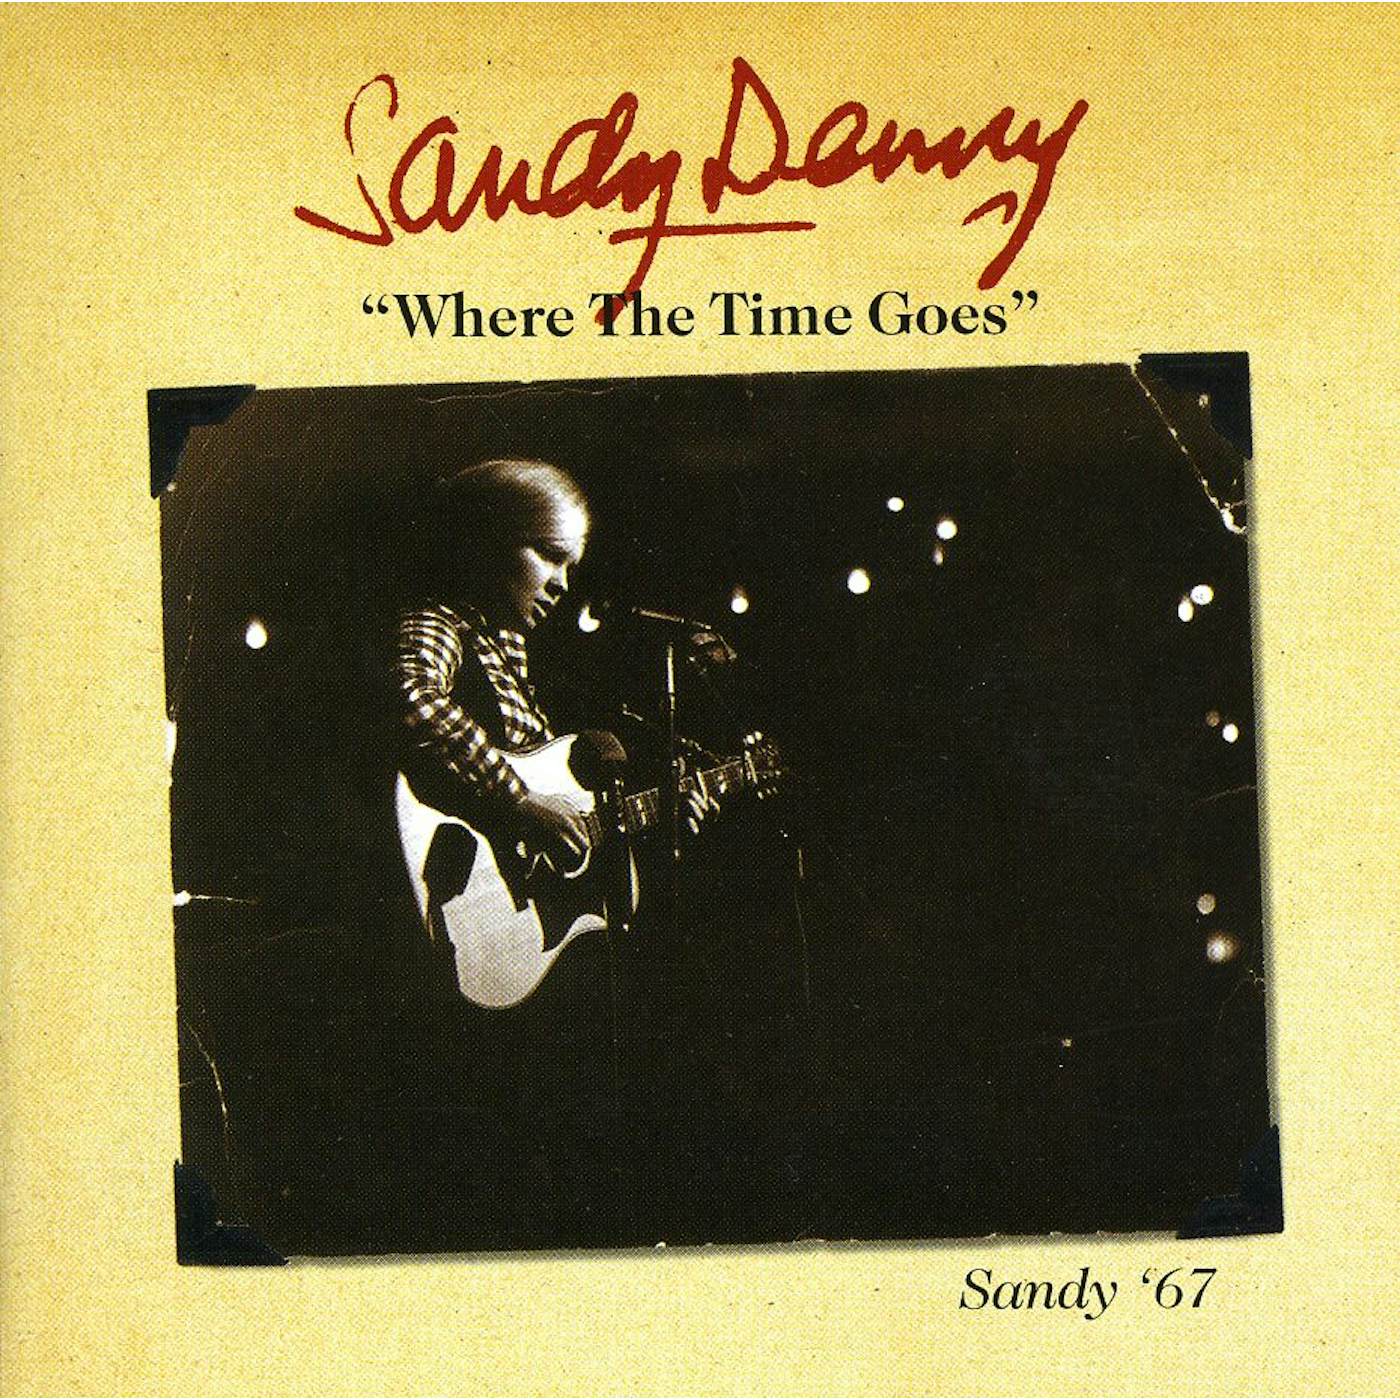 Sandy Denny WHO KNOWS WHERE THE TIME GOES: THE EARLY YEARS CD